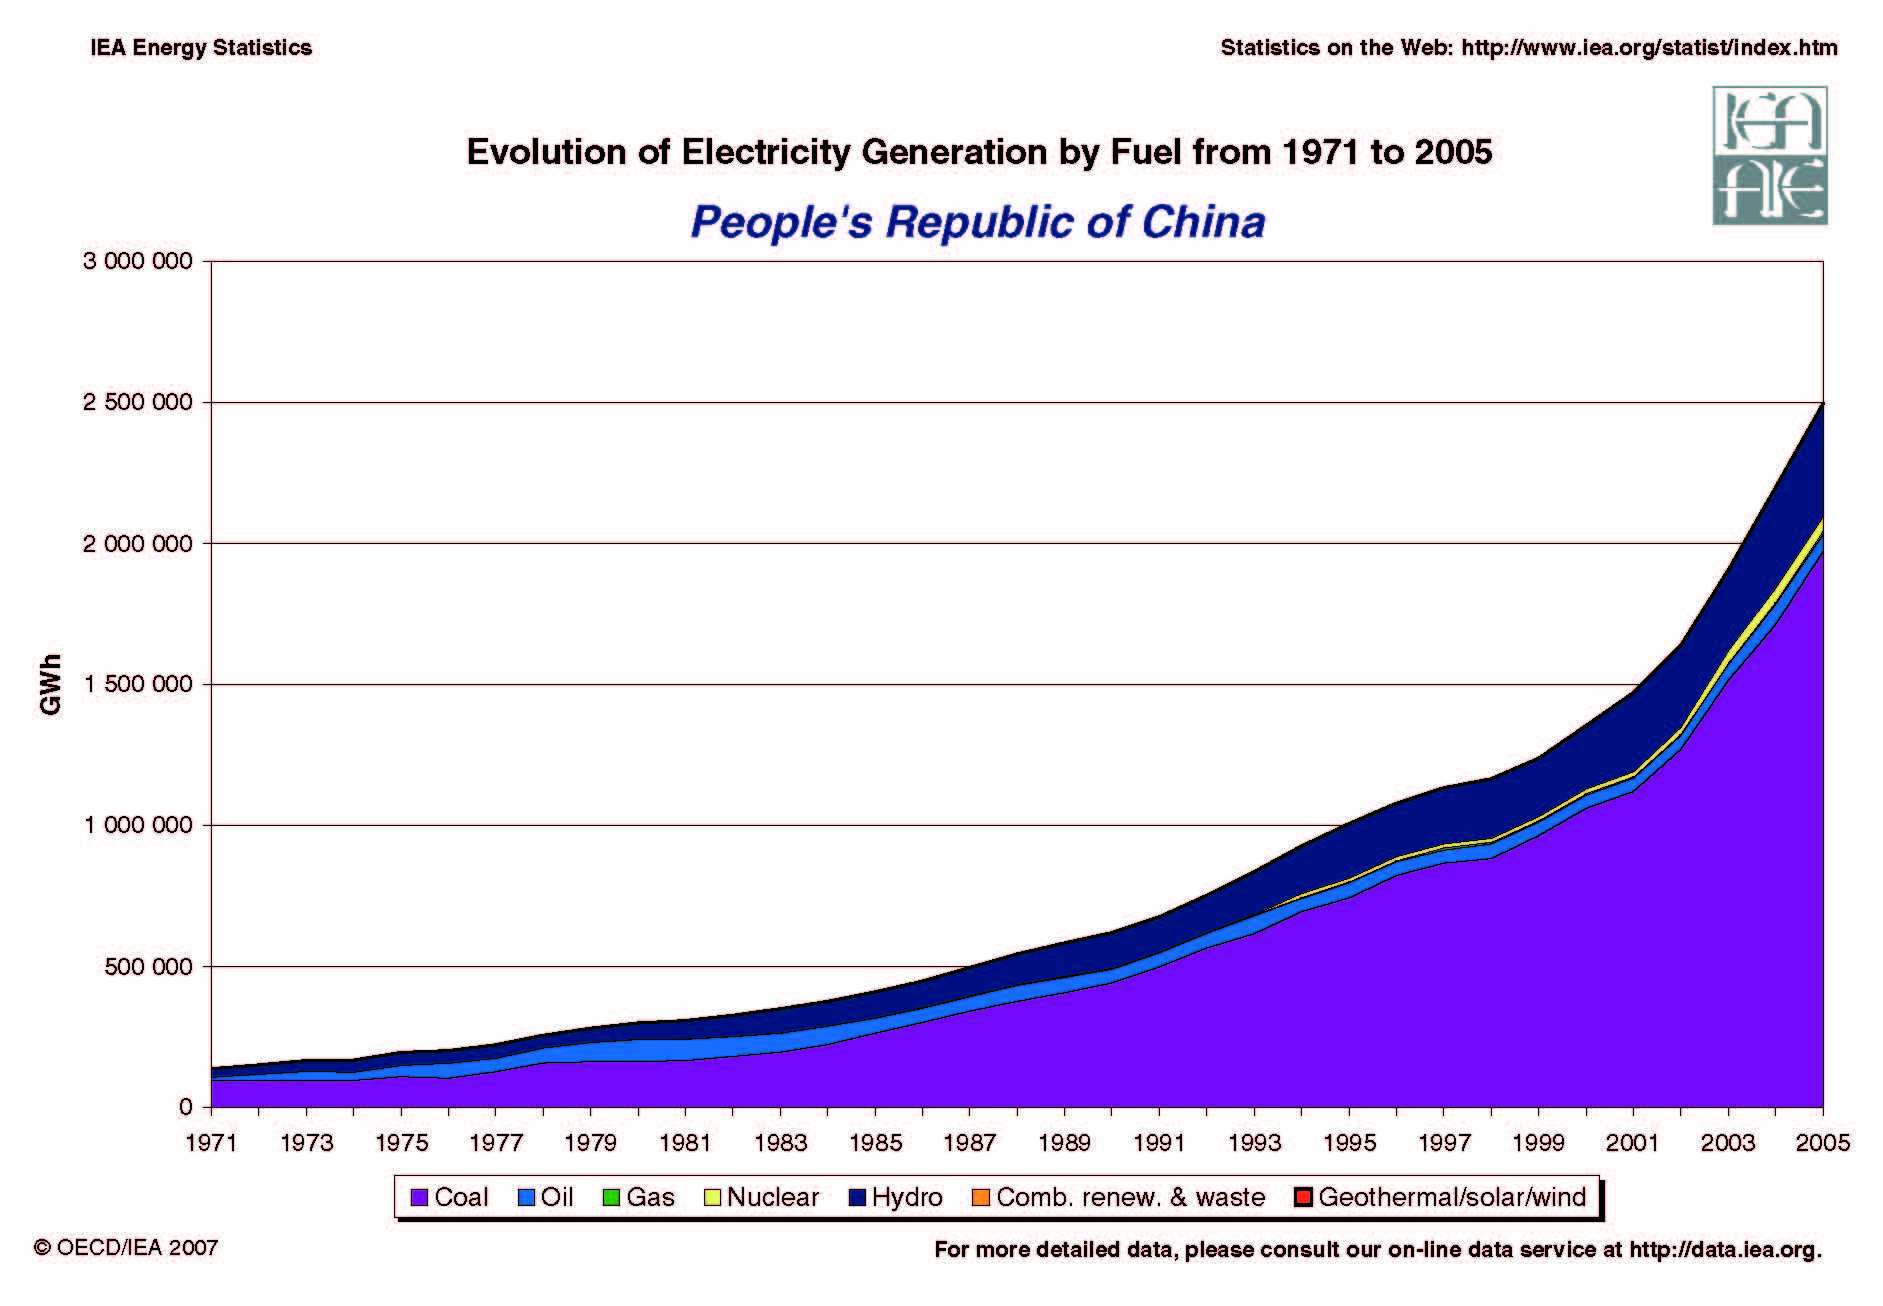 China Evolution of Electricity Generation by Fuel 1971 - 2005